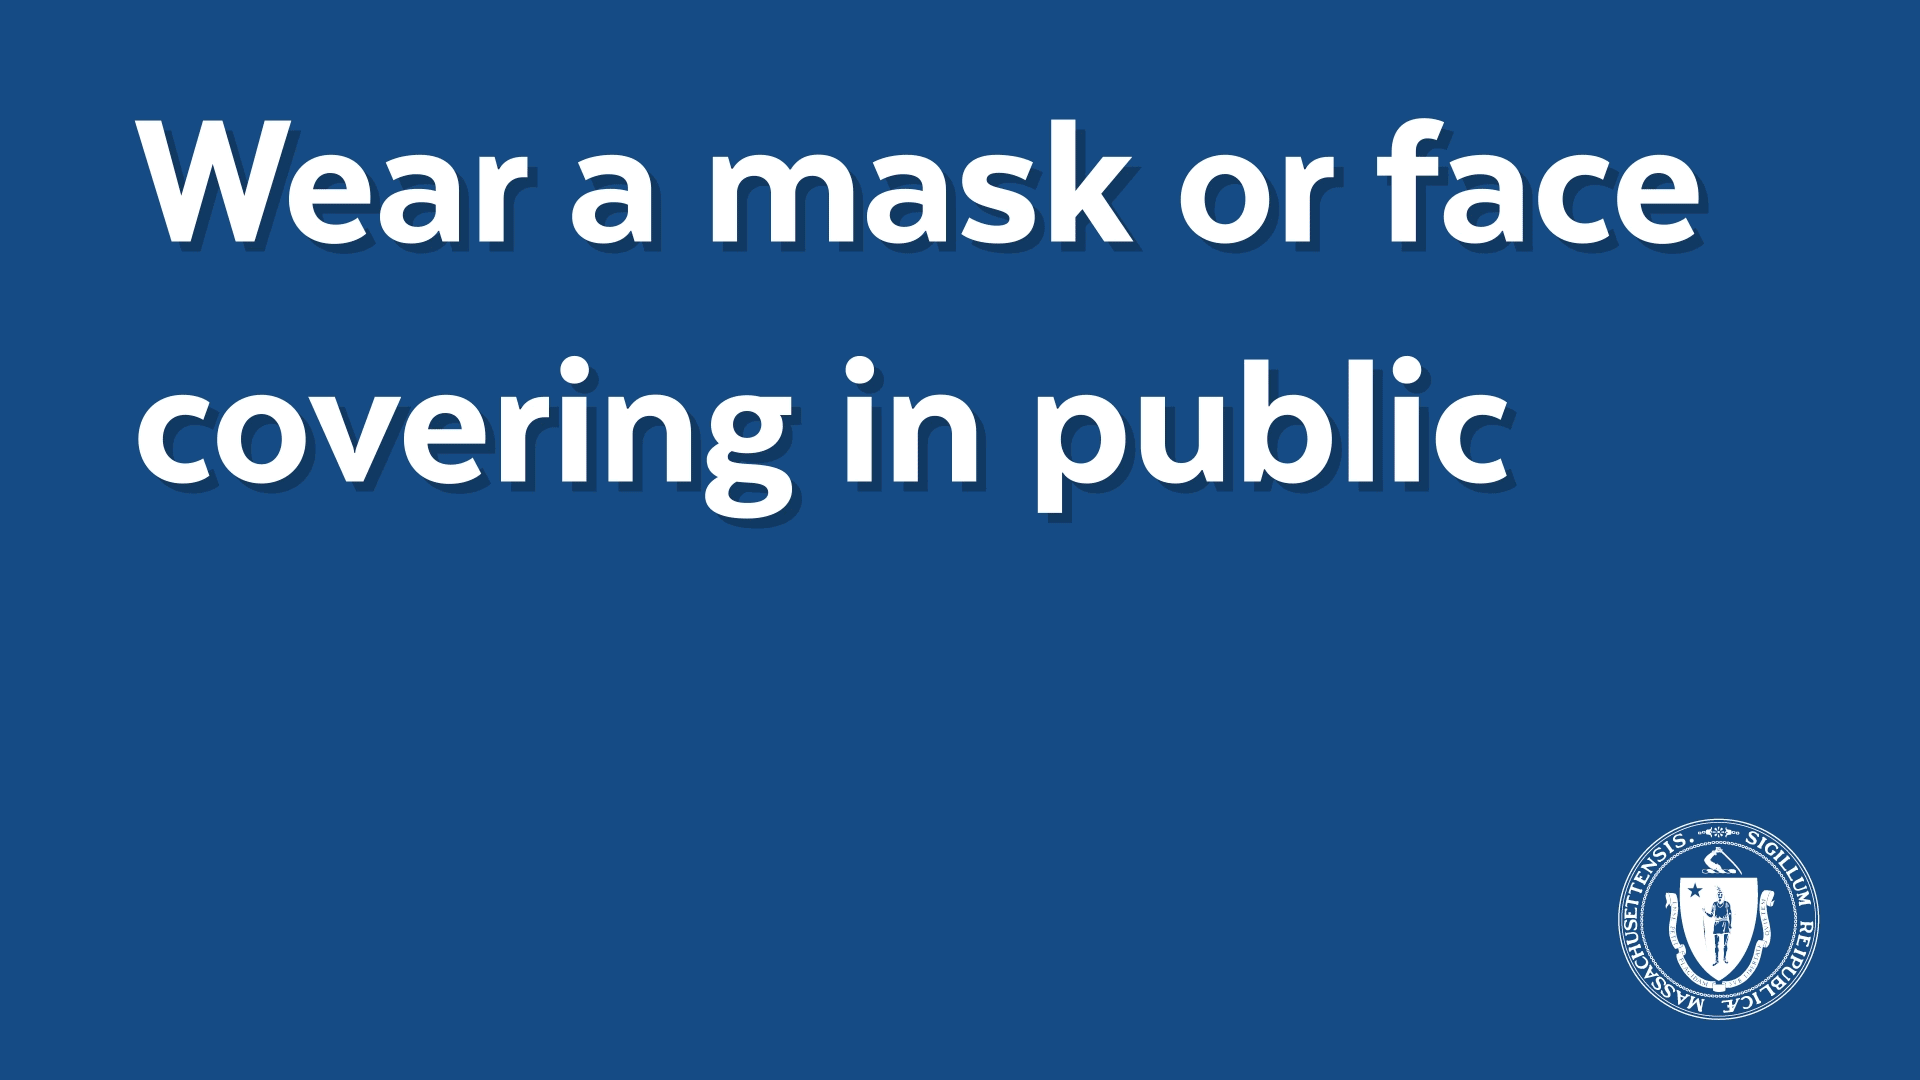 Wear a mask or face covering in public